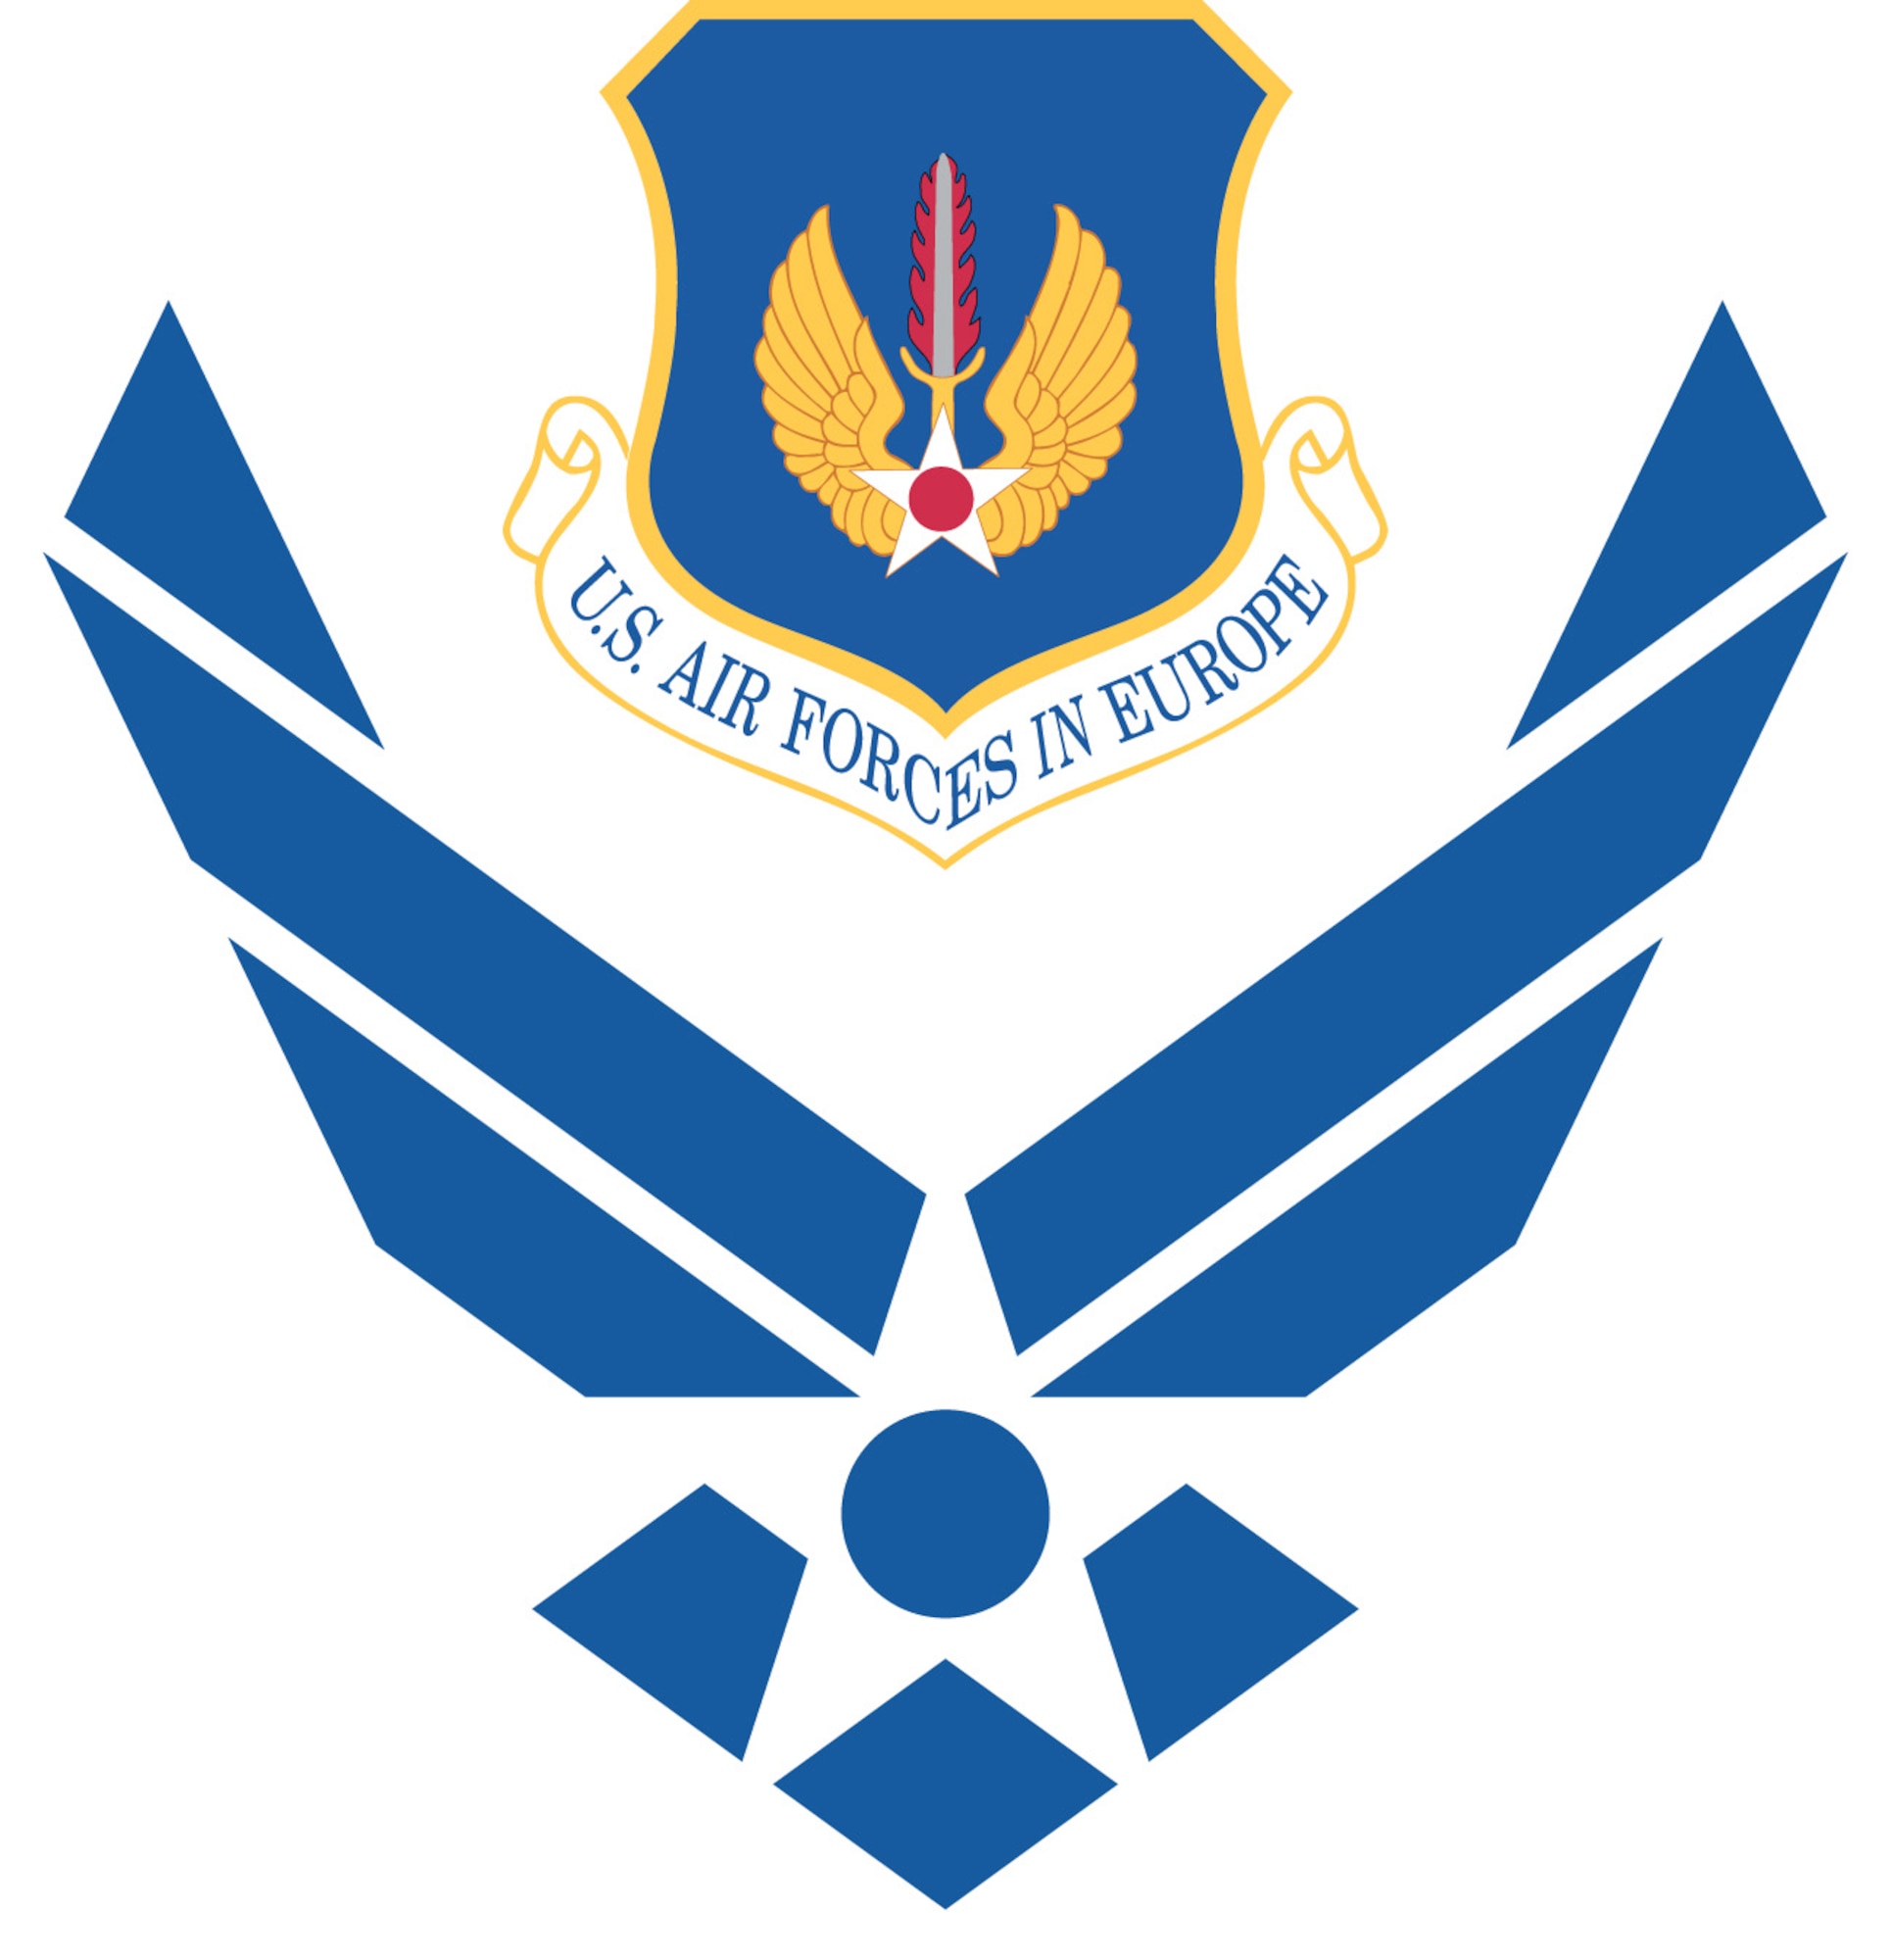 Air Force symbol with cradled U.S. Air Forces in Europe shield (clr), Commercial reproduction of this emblem is NOT permitted without the permission of the proponent organizational/unit commander. Image is 7x7 inches @ 300 ppi. 